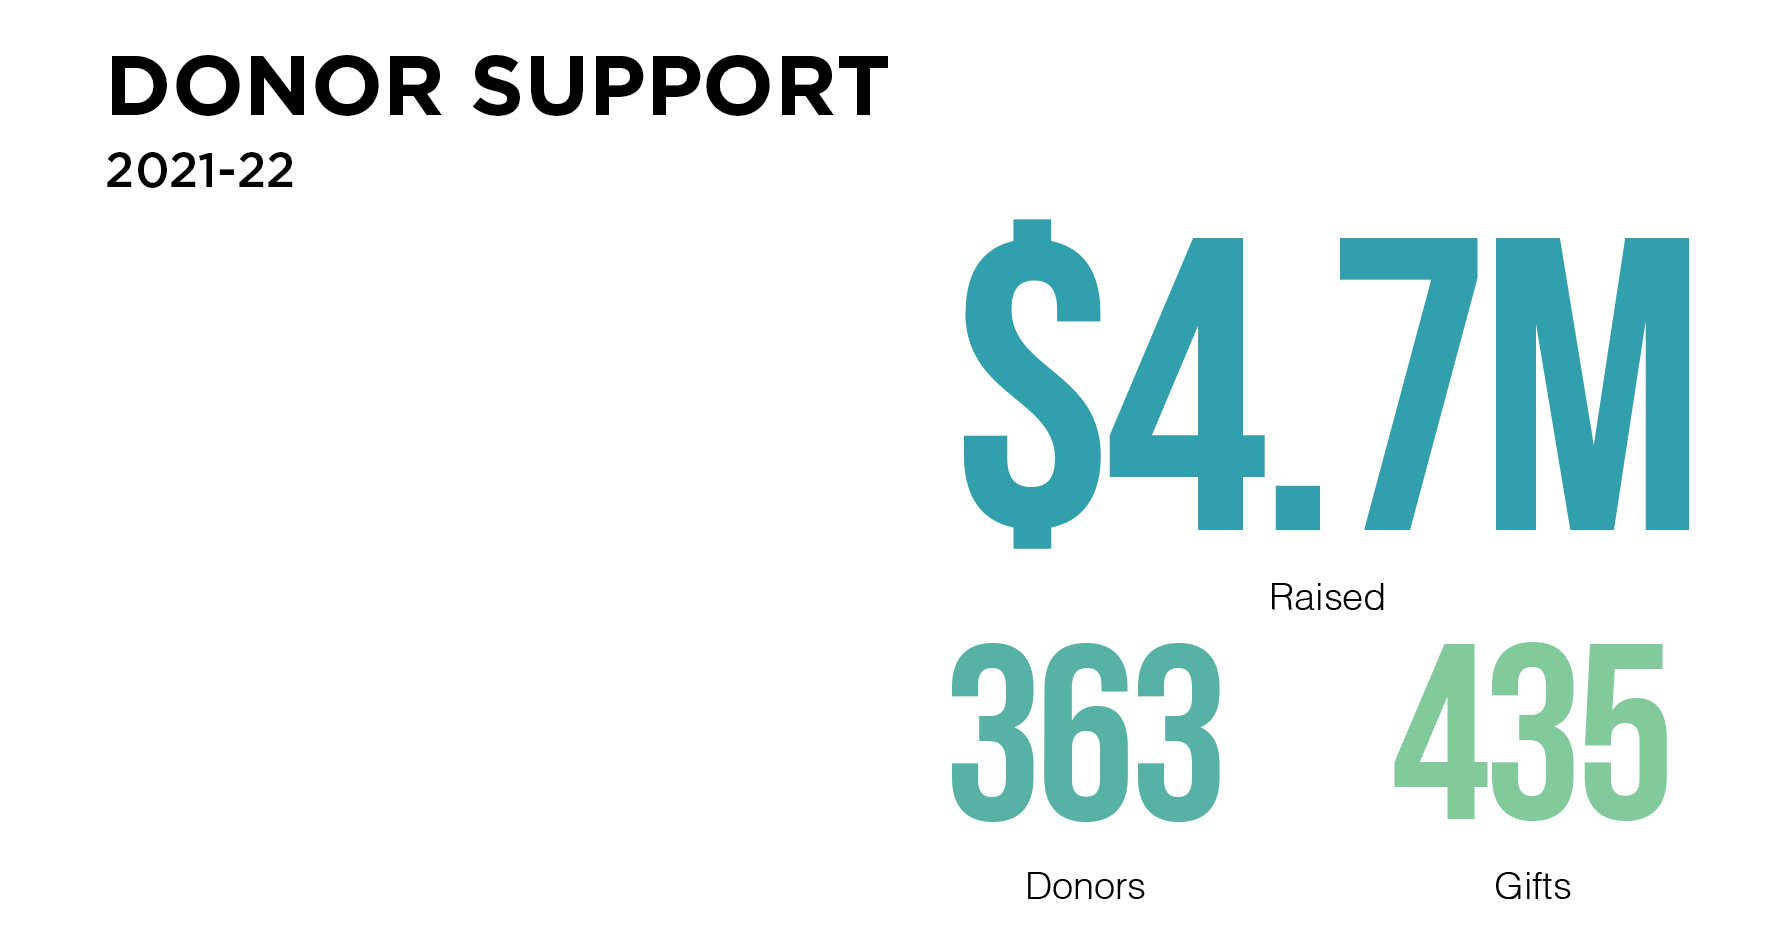 2021-22 Donor Support